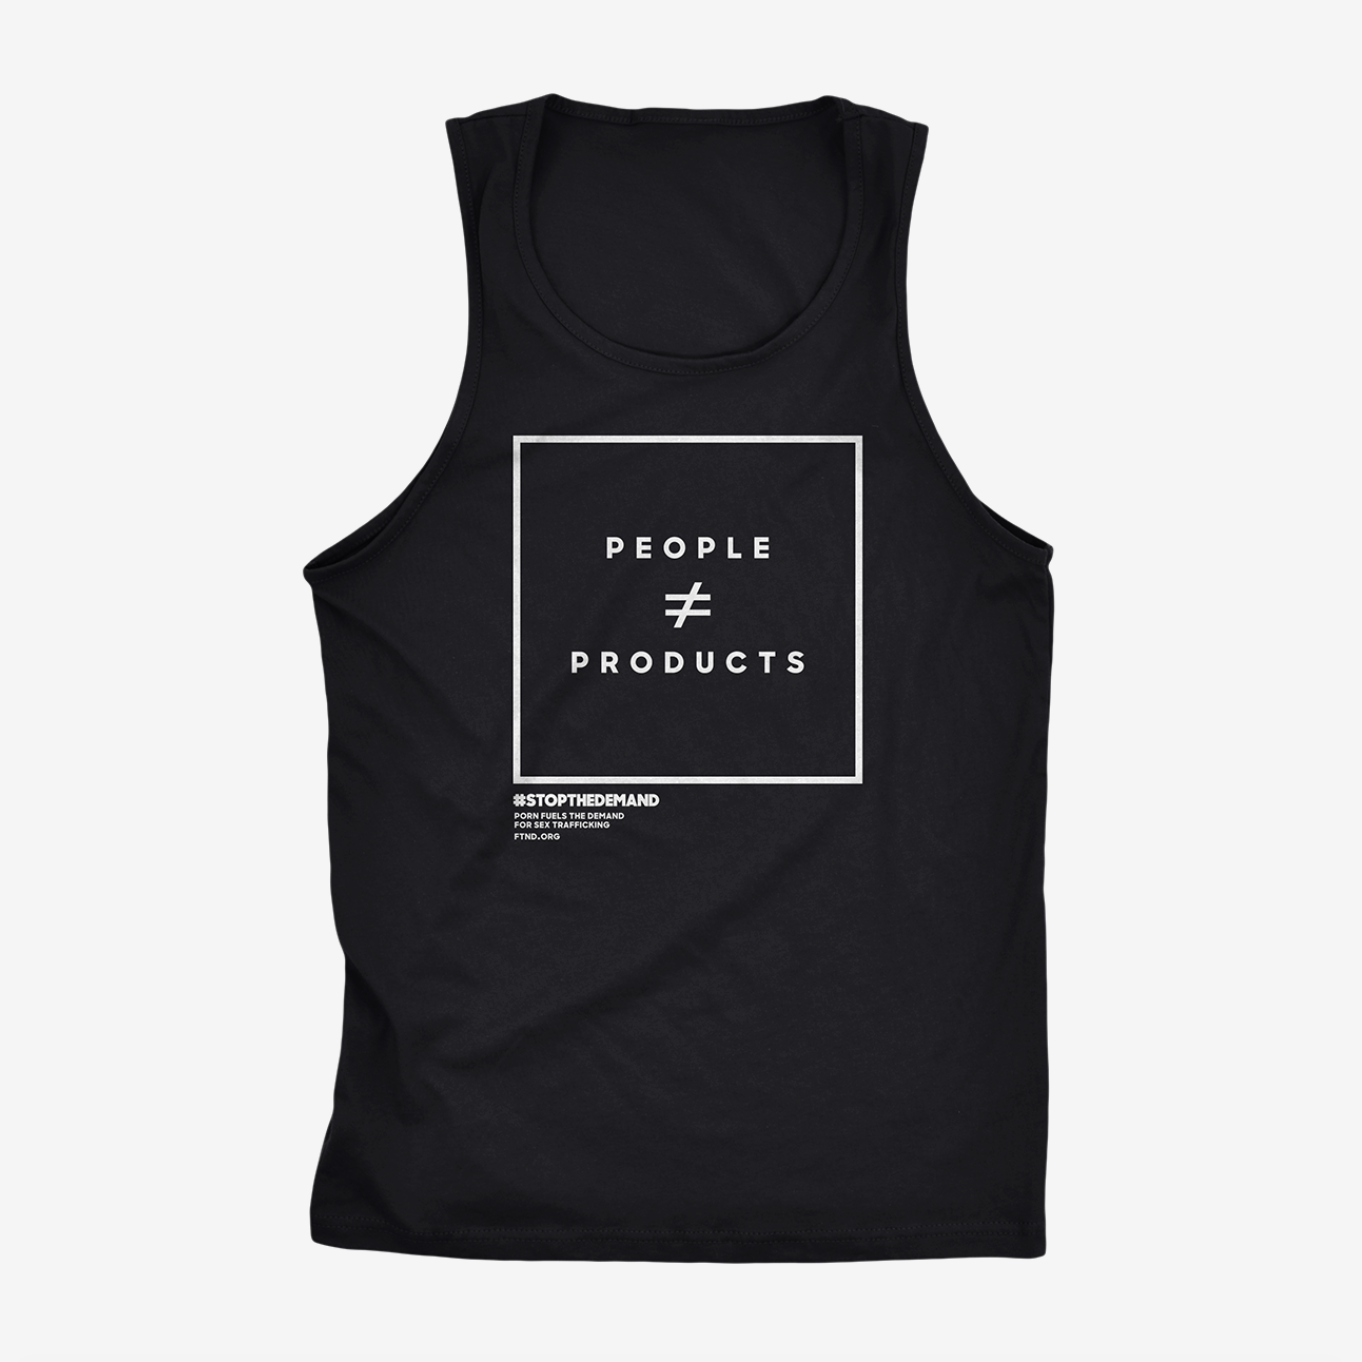 People ≠ Products Tank